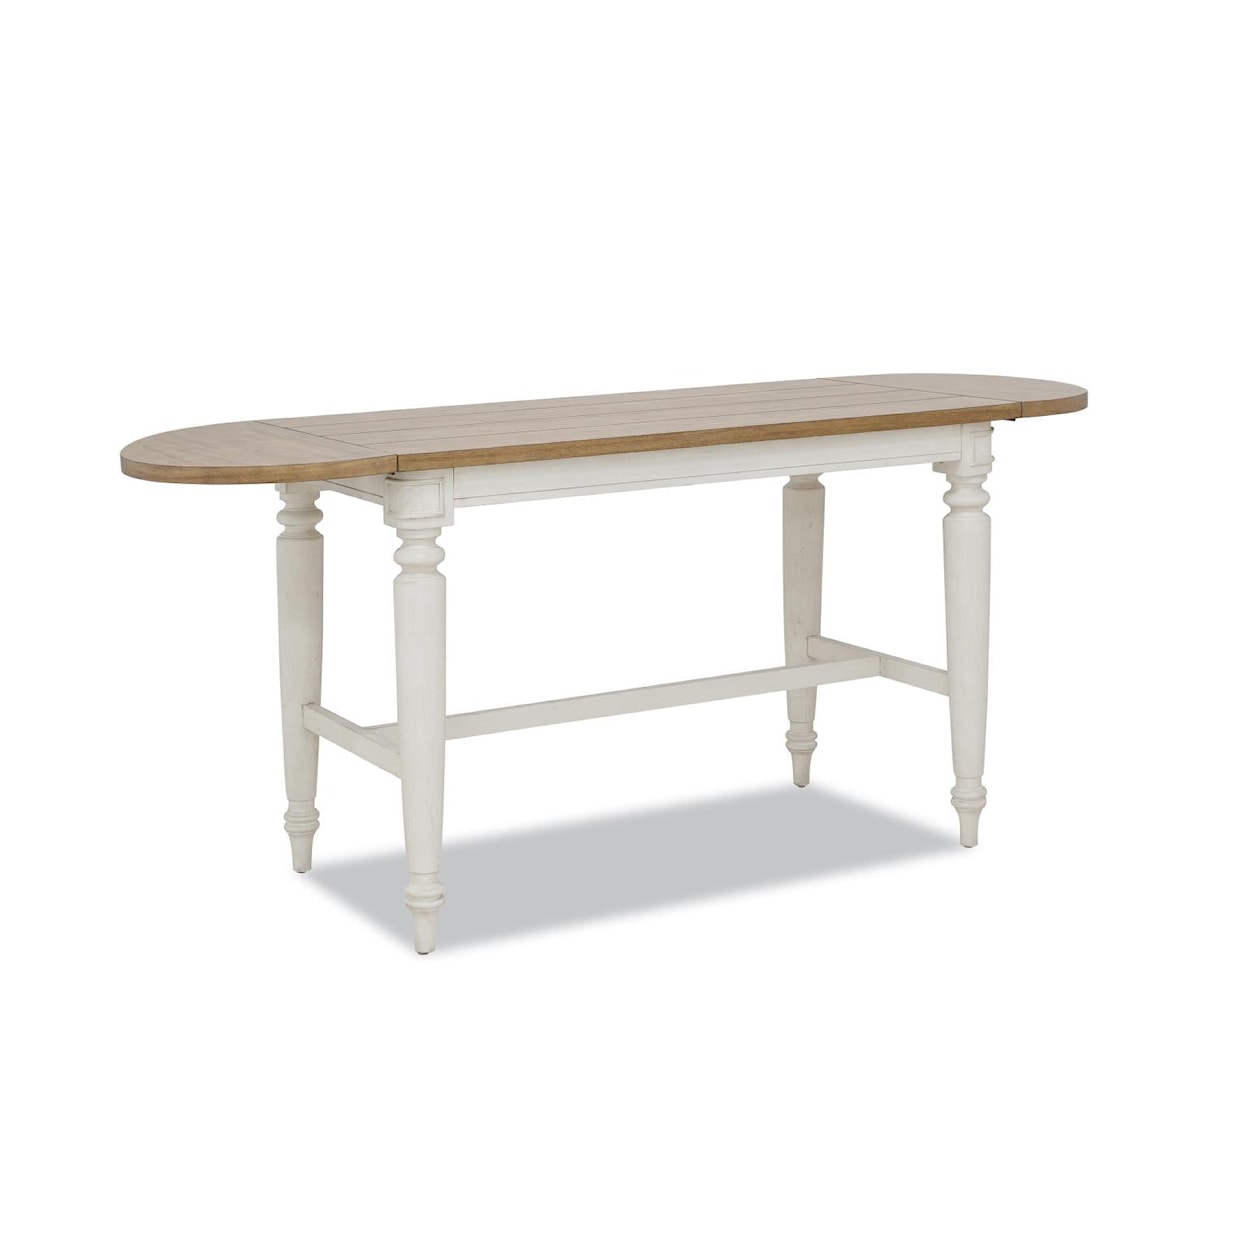 Trisha Yearwood Home Collection by Legacy Classic Nashville Drop Leaf Counter Height Table